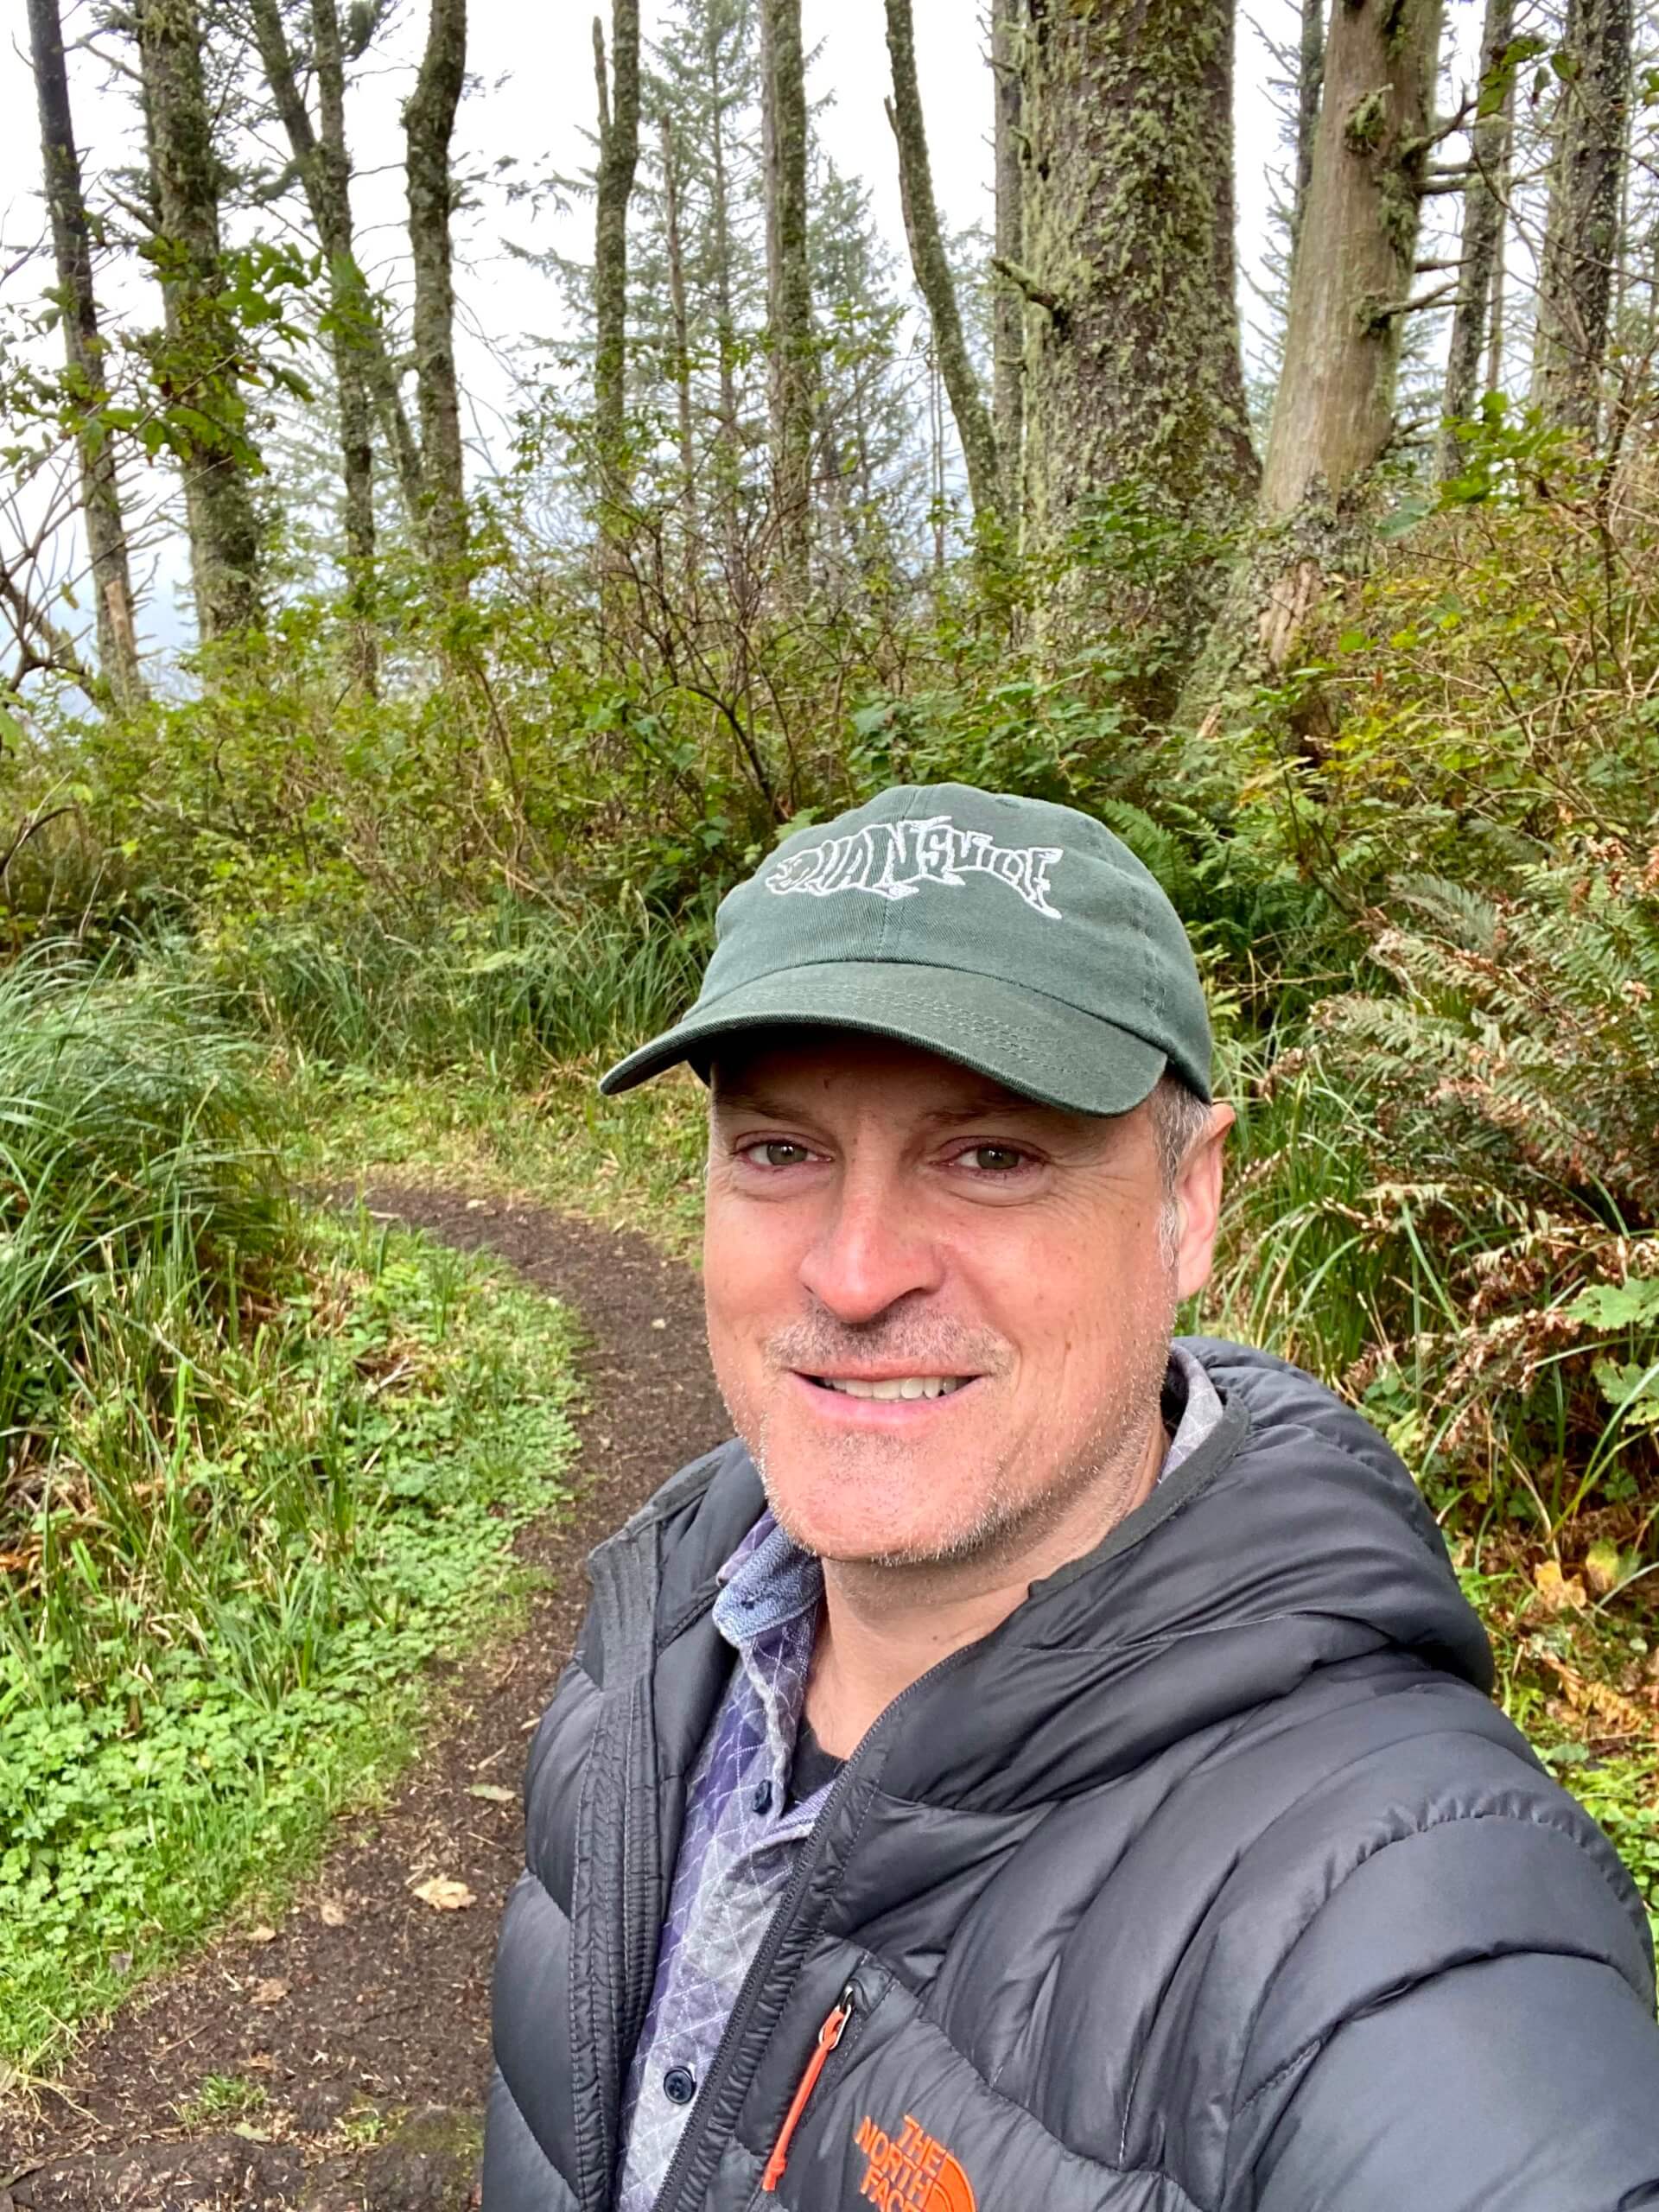 Matthew Kessi poses for a selfie in a forest near Yachats Oregon. He's smiling while wearing a green cap and gray puffy coat while a forest of sitka spruce trees pop up along the hiking trail behind him.